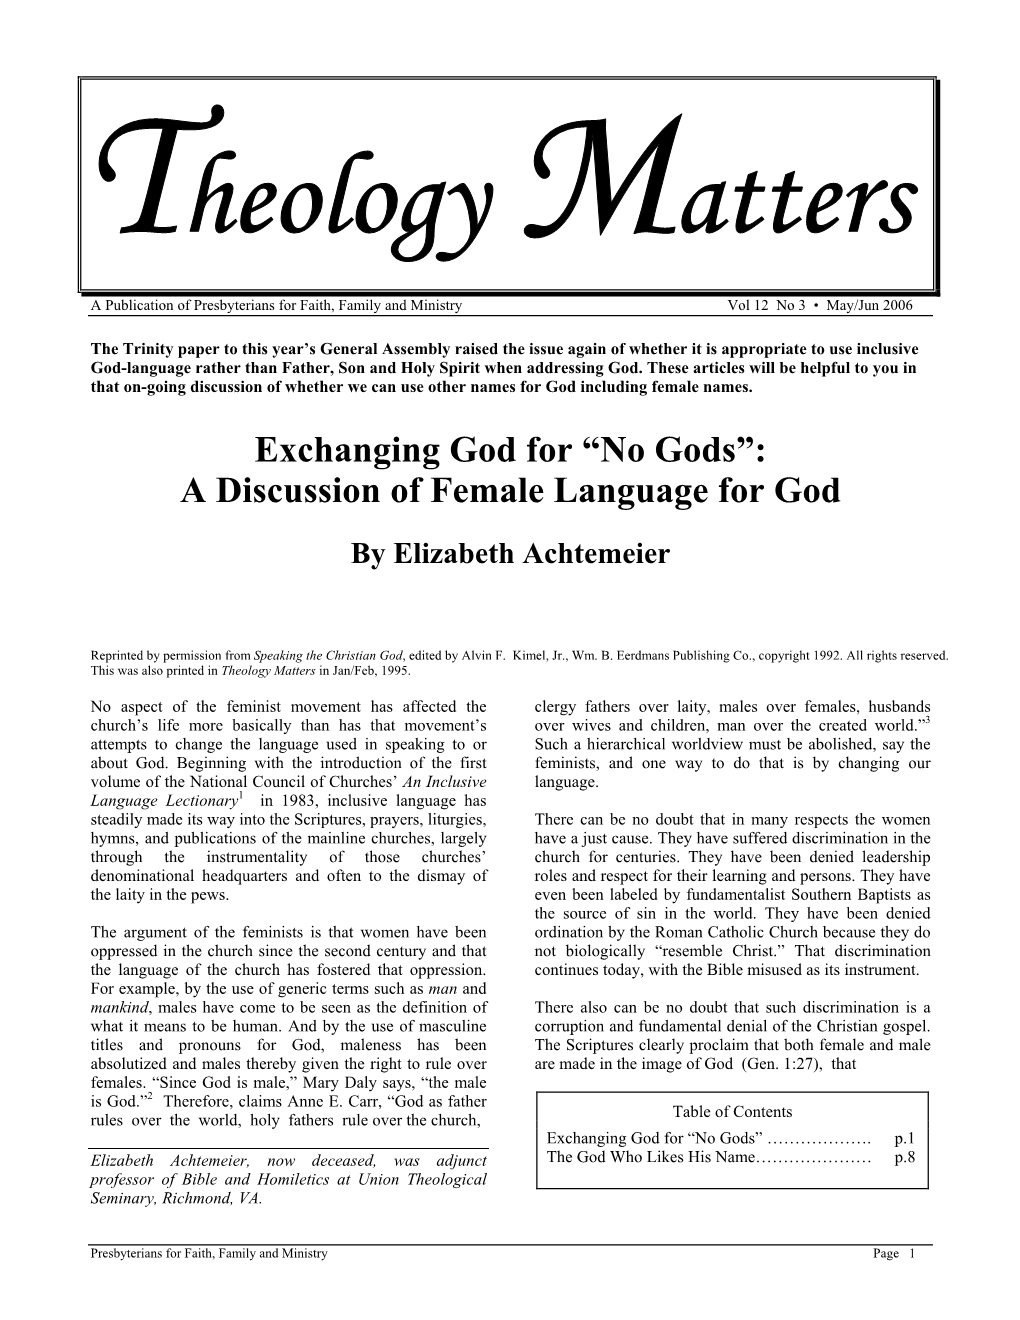 Exchanging God for “No Gods”: a Discussion of Female Language for God